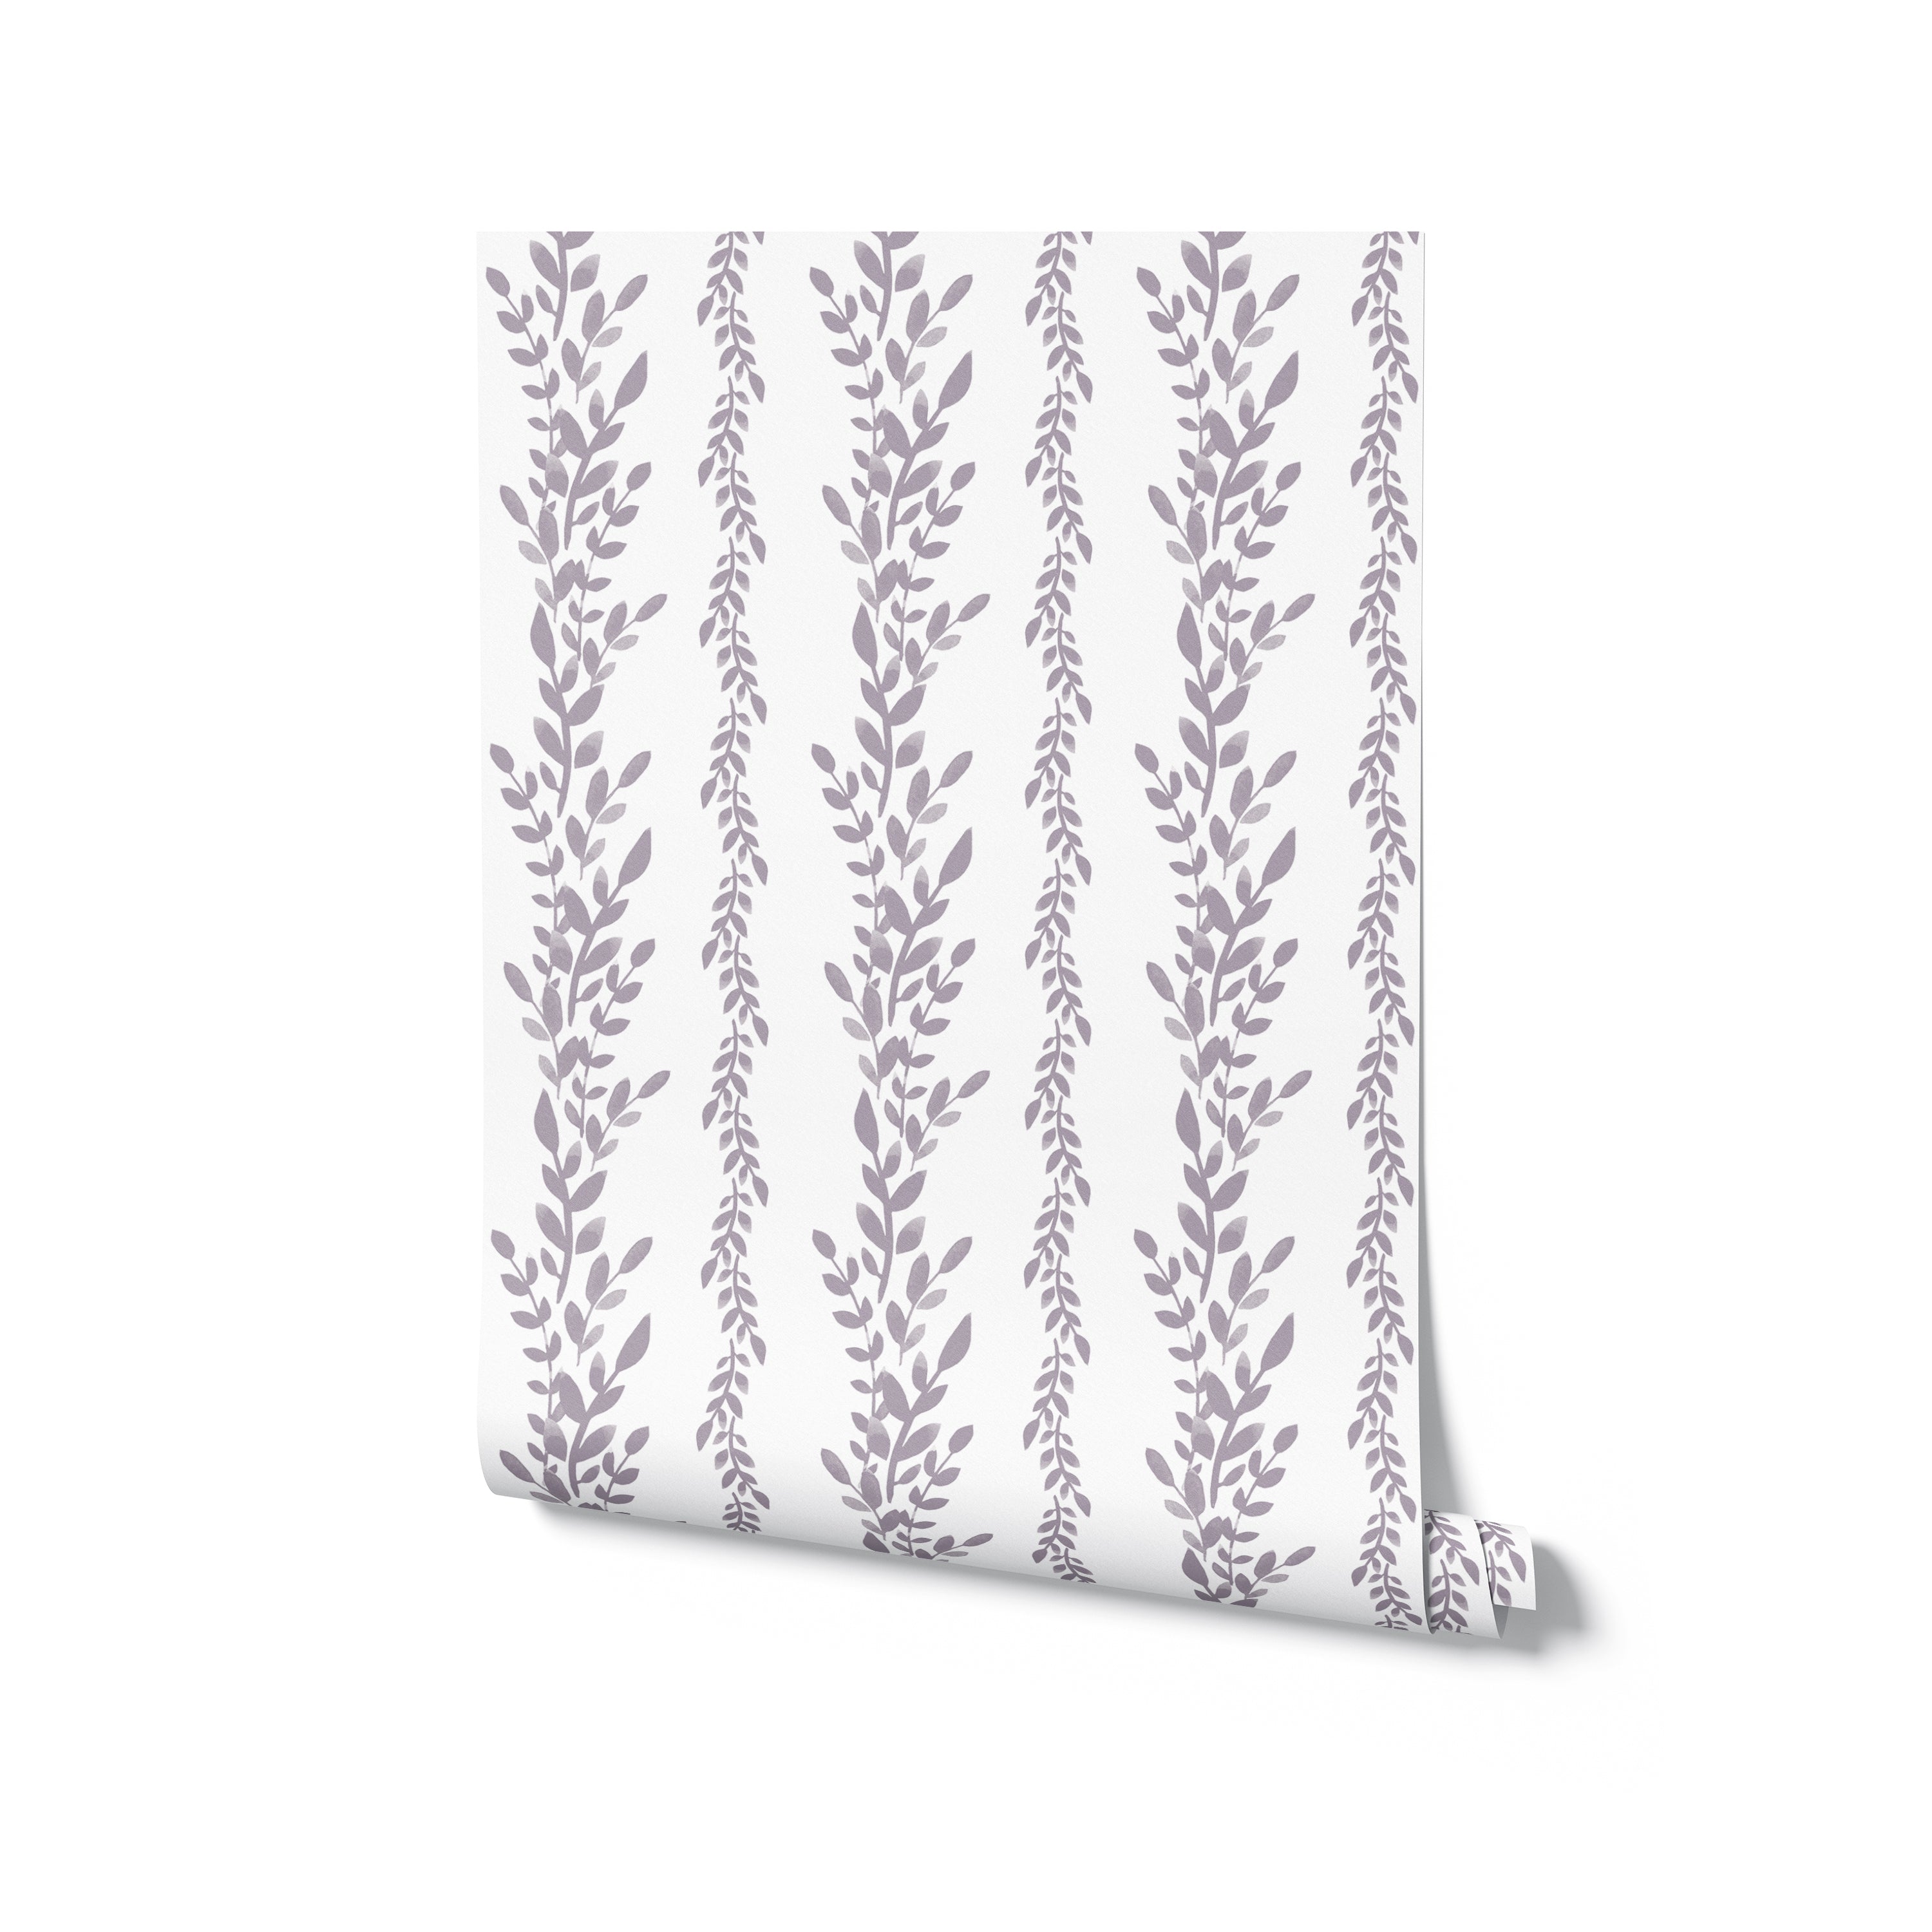 A roll of Classic Floral Wallpaper depicted vertically, highlighting the wallpaper’s continuous gray floral pattern on a white background, perfect for stylish and timeless interior design